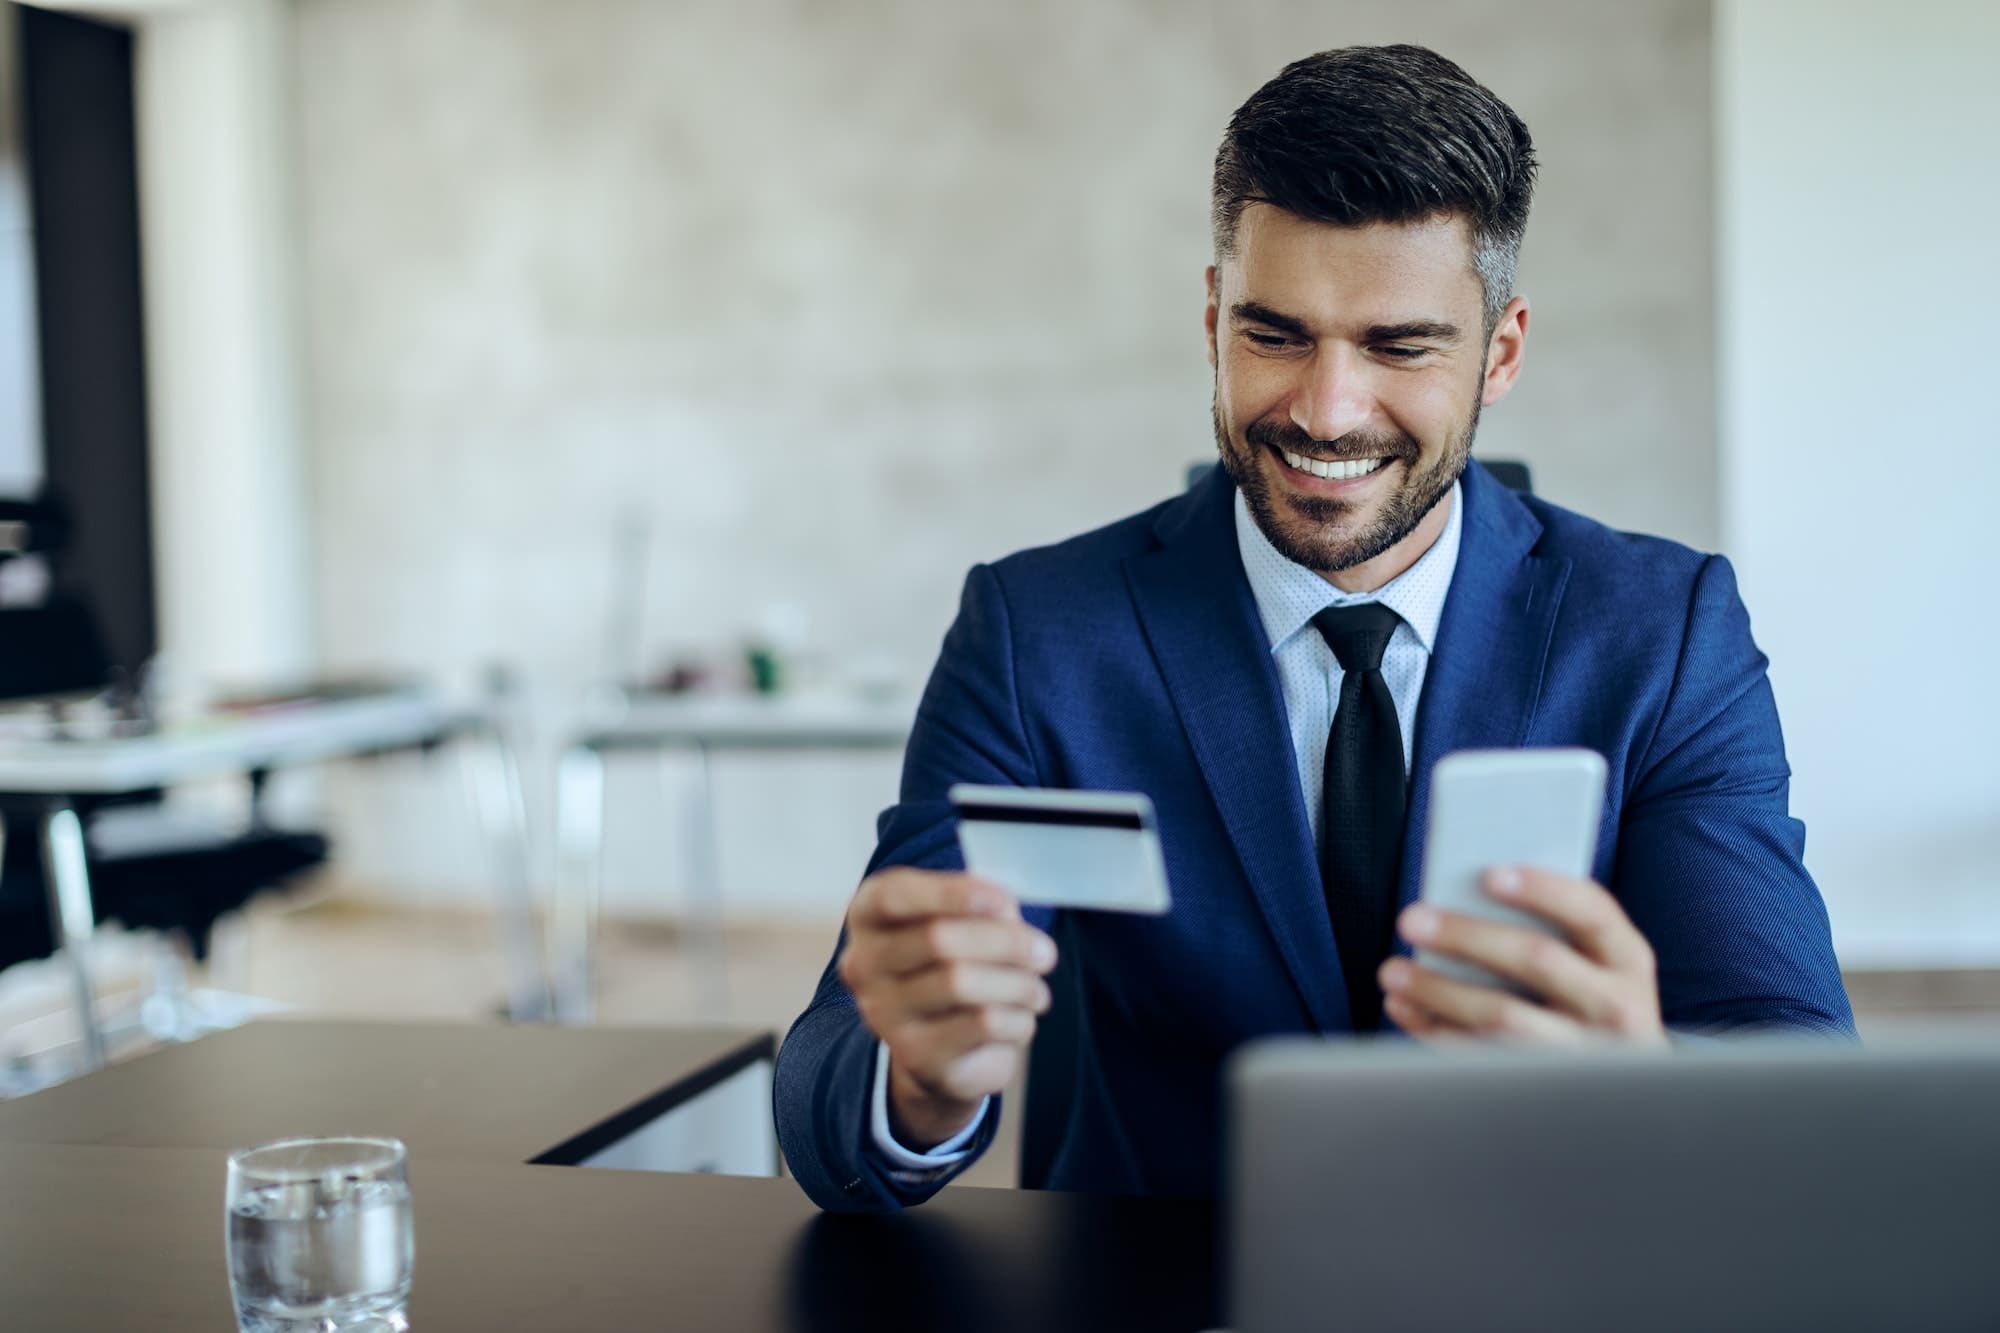 Smiling customer using a banking app on their phone